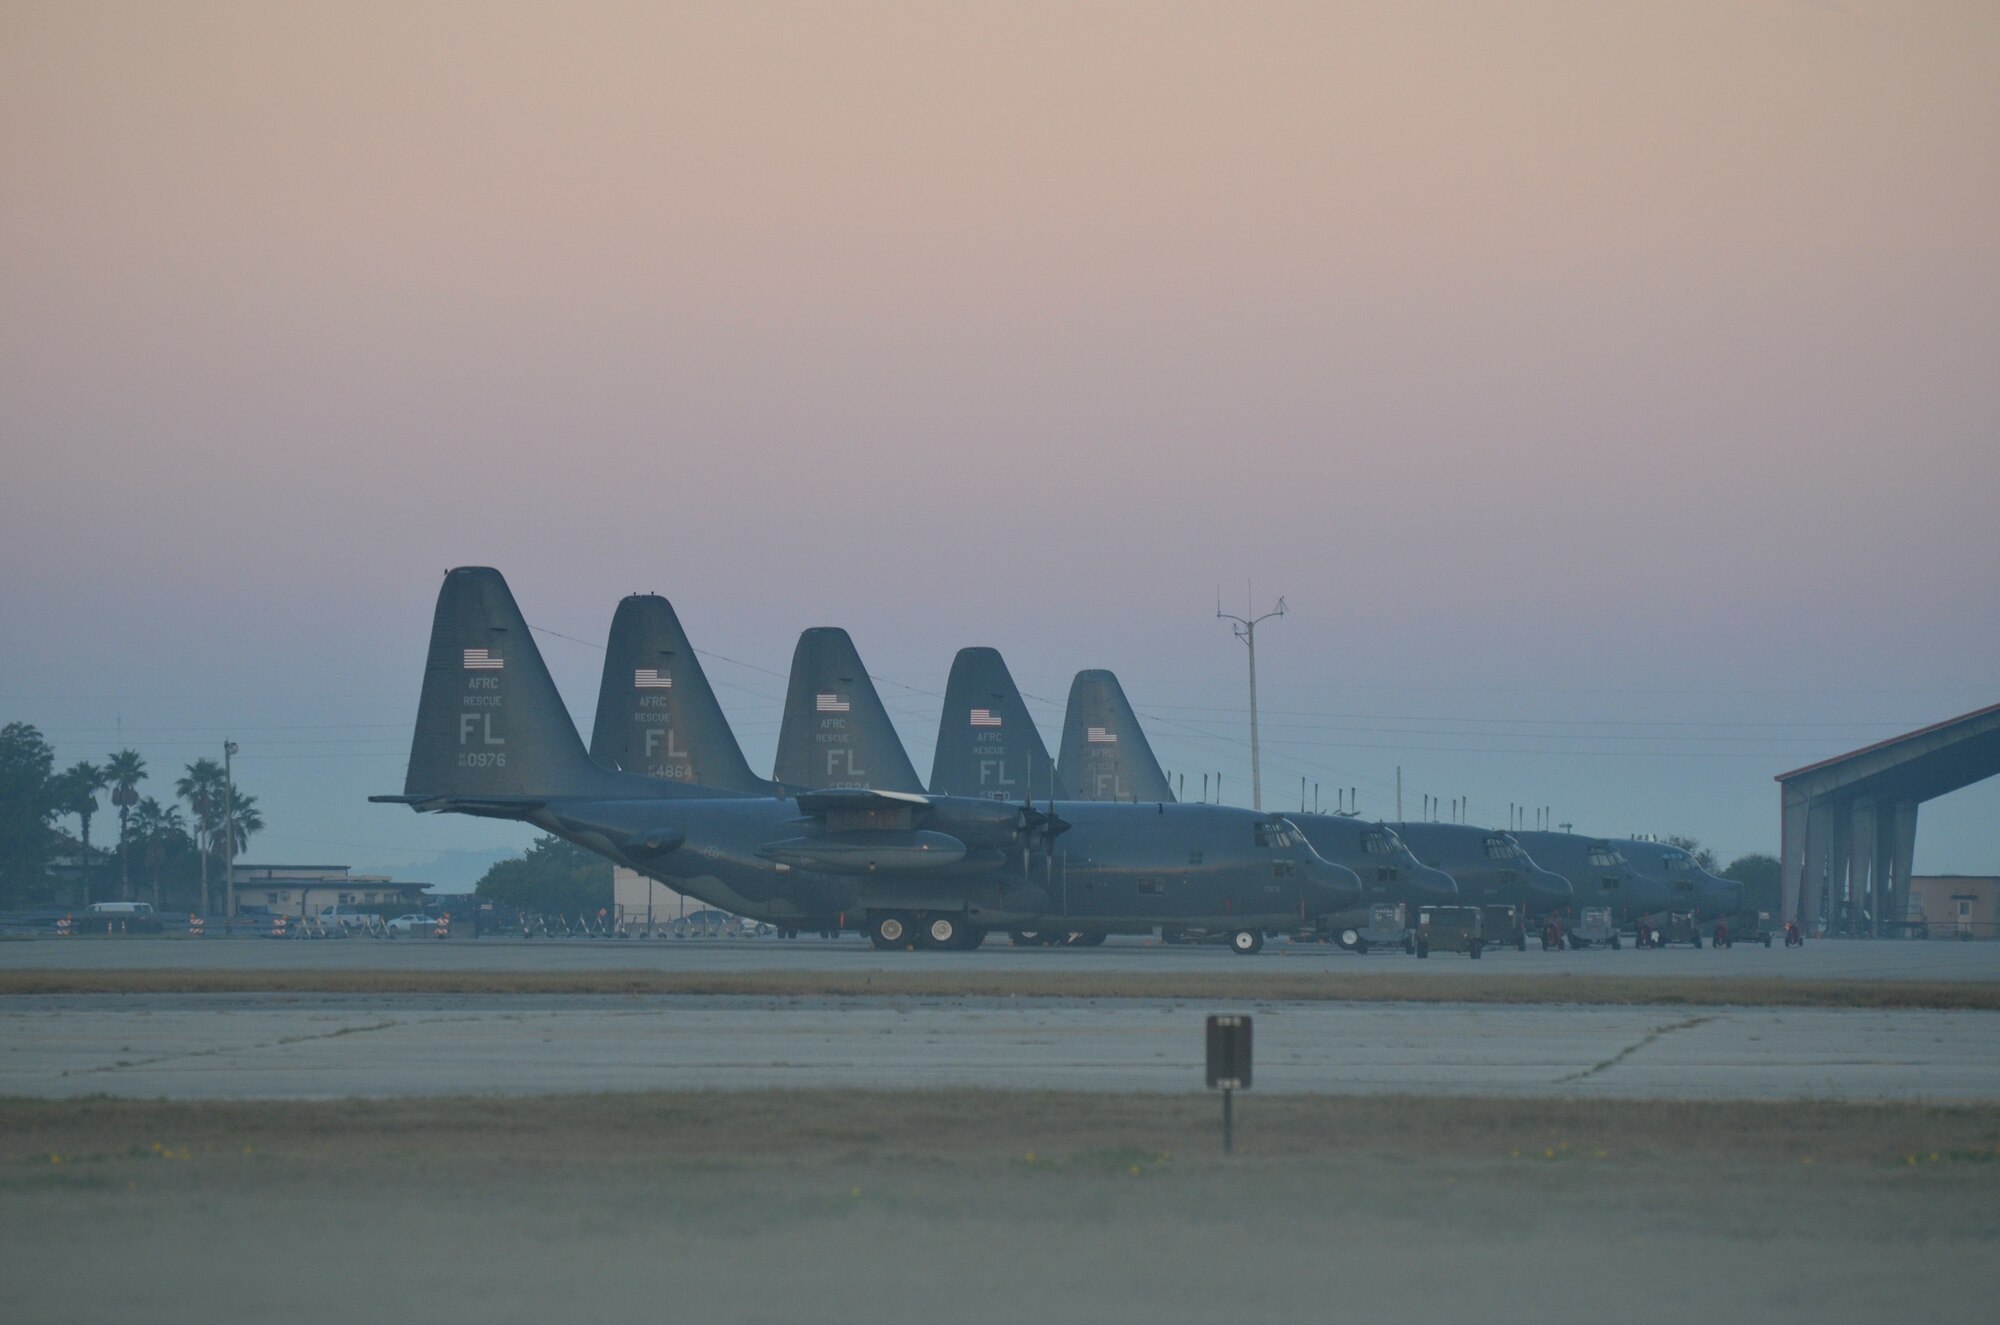 The 920th Rescue Wing fleet of HC-130P/N King aircraft line the Patrick Air Force Base flightline Jan. 9 as maintenance Airmen prepare to go to work on them. During weekend drill training Jan 6-7, aircrew Airmen exercised their flying muscles on local training flights to keep their flight currencies up to date. There were approximately 1,100 920th Reserve Airmen at the base performing their war readiness training as they do one weekend every month. (U.S. Air Force photo/Capt. Cathleen Snow)